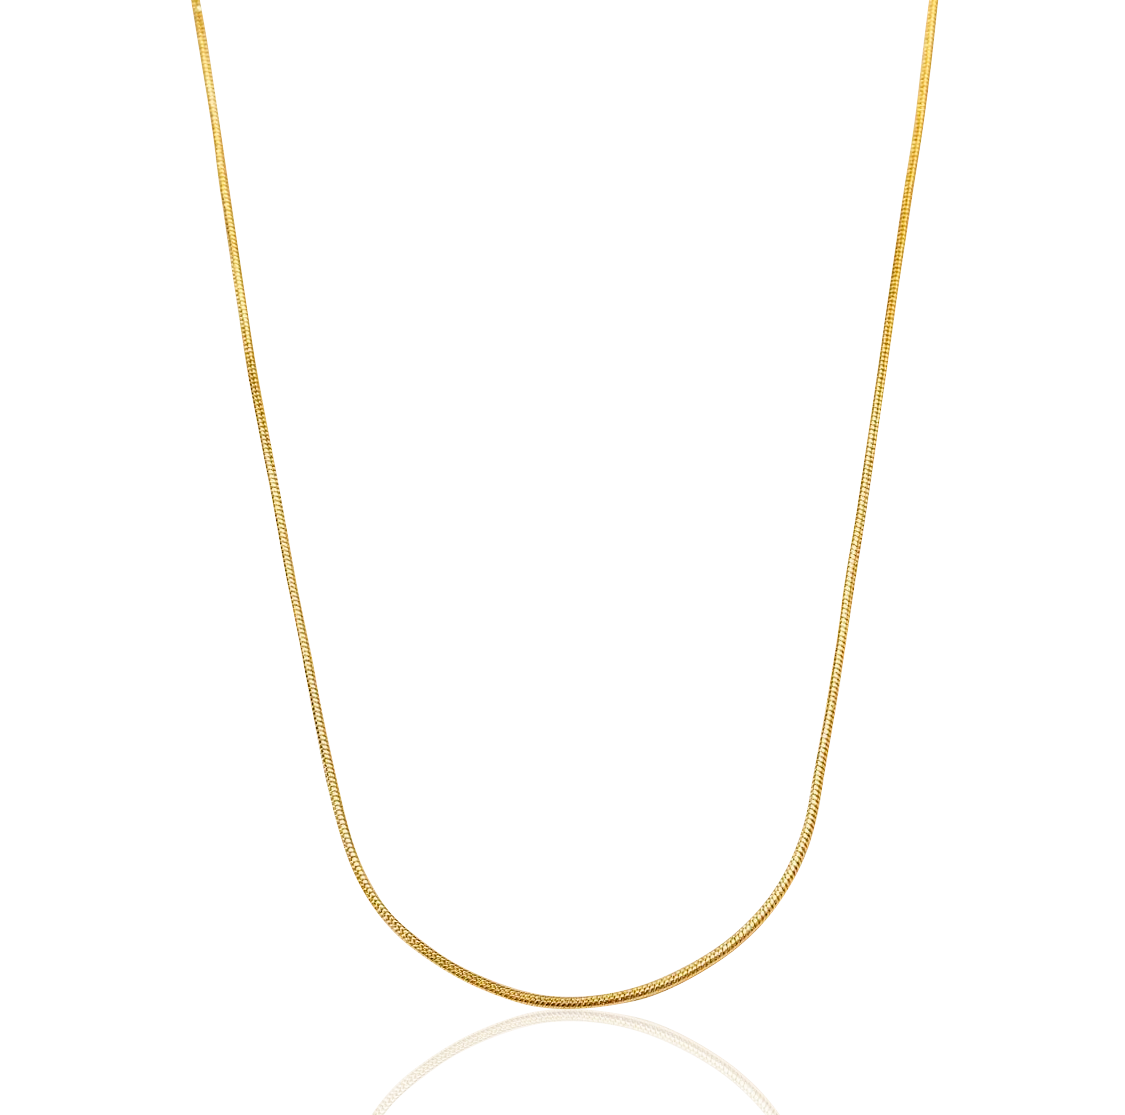 Simple 18K Gold Filled Snake Necklace - Kate Gates Jewelry